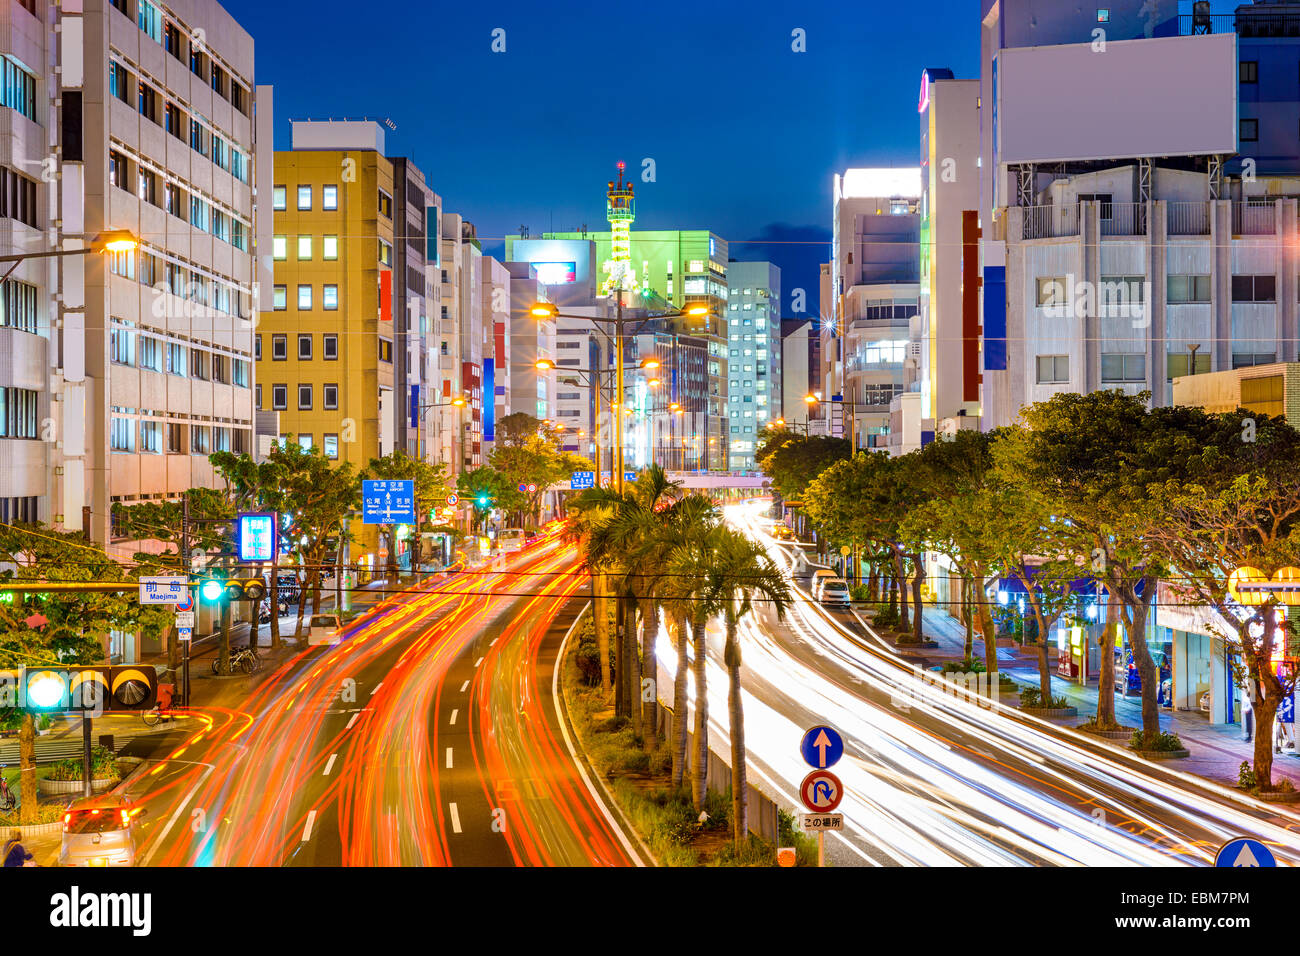 Naha, Okinawa, in Giappone downtown cityscape oltre l'Expressway. Foto Stock